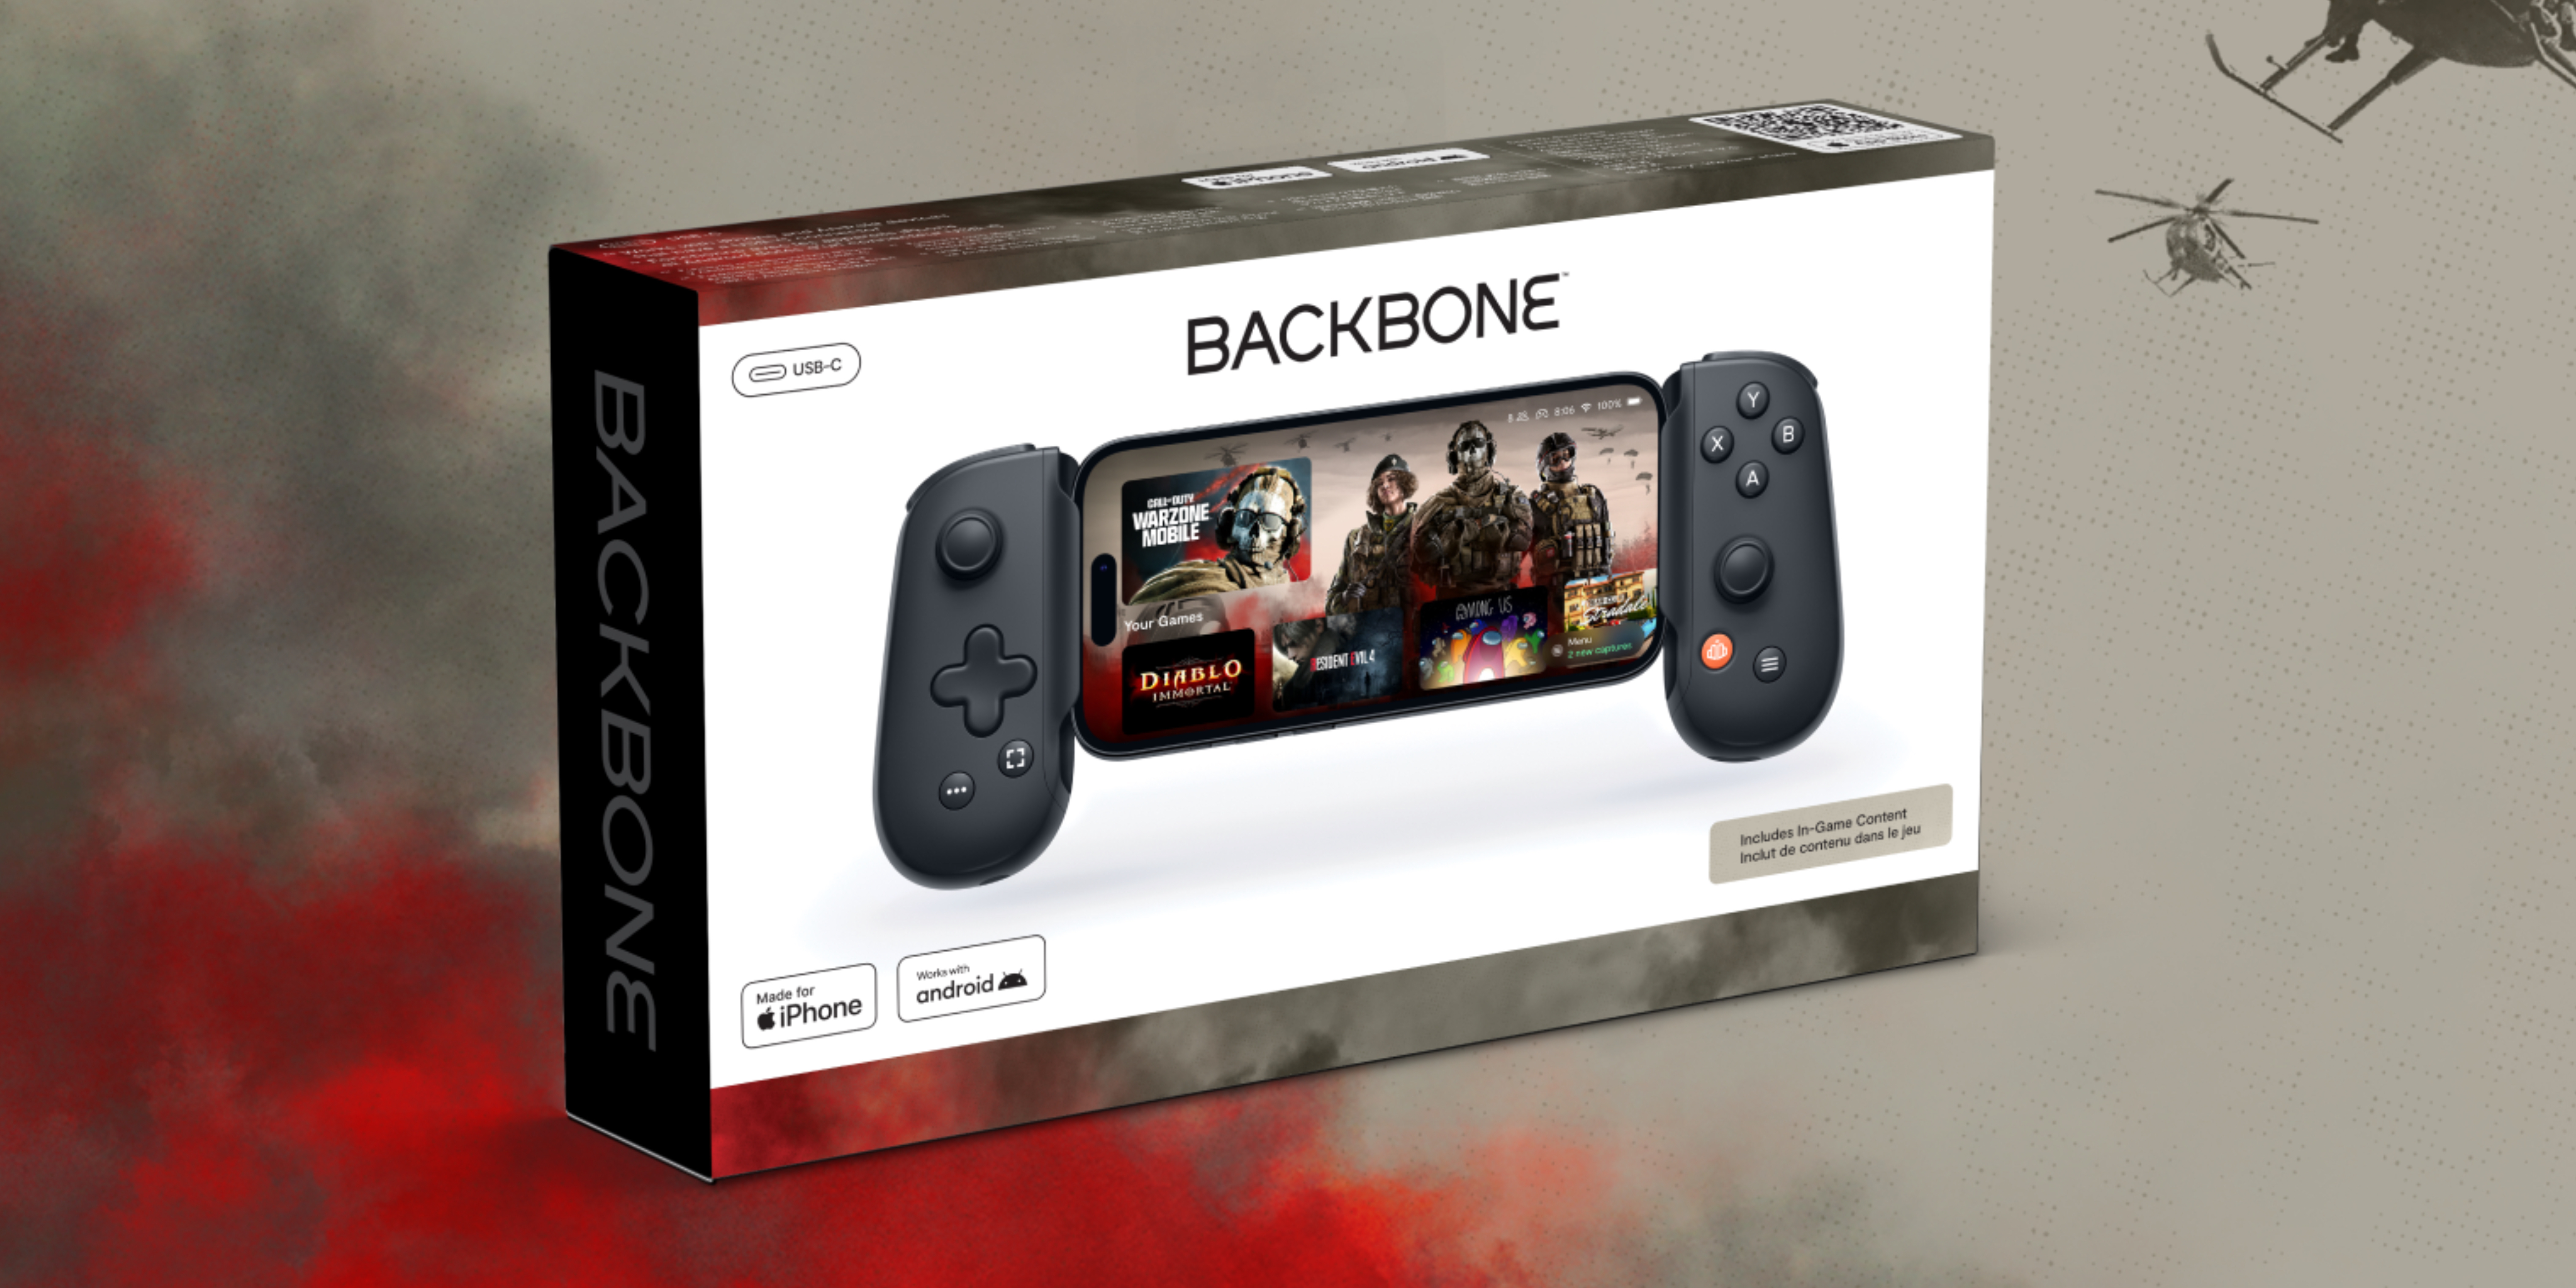 The packaging for the Backbone One gaming controller.